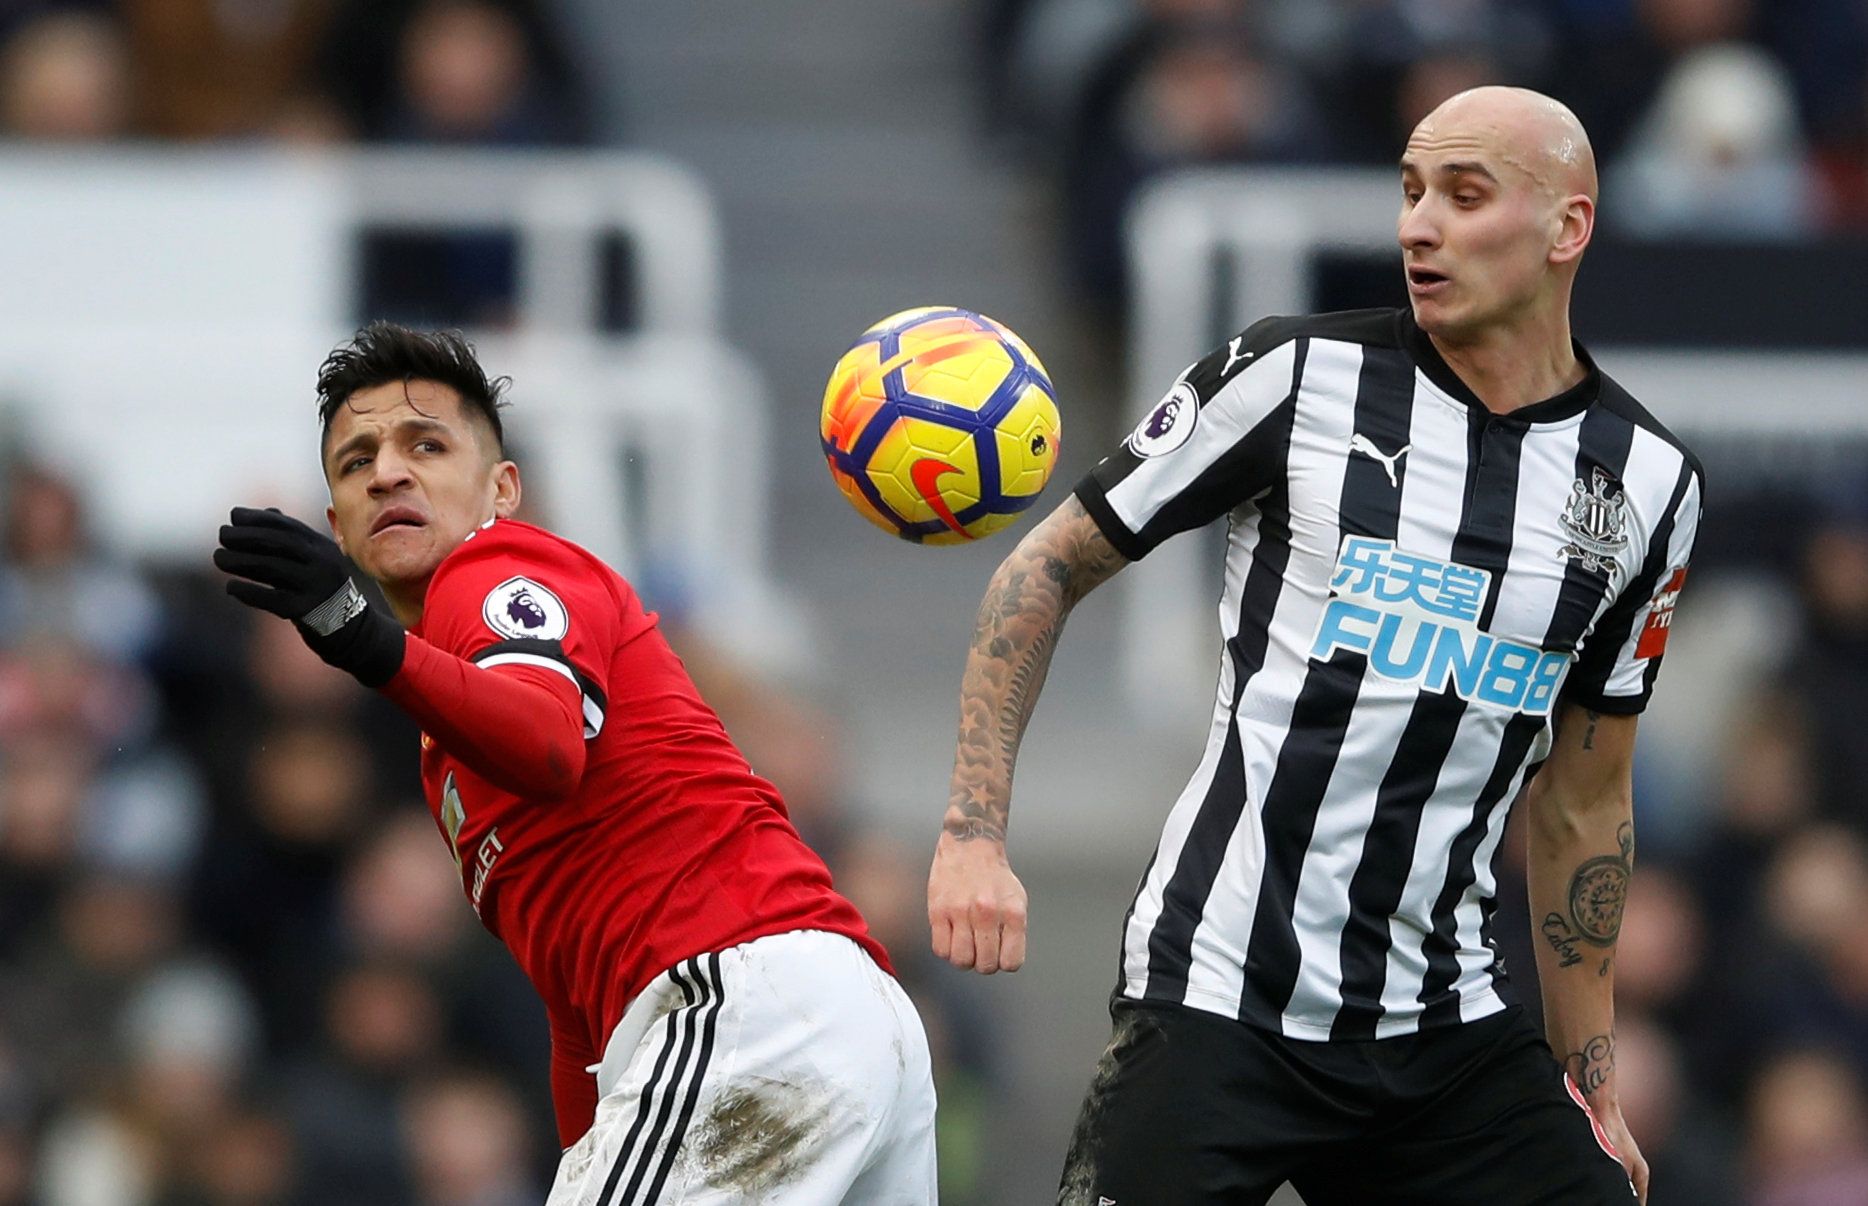 Soccer Football - Premier League - Newcastle United vs Manchester United - St James' Park, Newcastle, Britain - February 11, 2018   Manchester United’s Alexis Sanchez in action with Newcastle United's Jonjo Shelvey    Action Images via Reuters/Carl Recine    EDITORIAL USE ONLY. No use with unauthorized audio, video, data, fixture lists, club/league logos or 